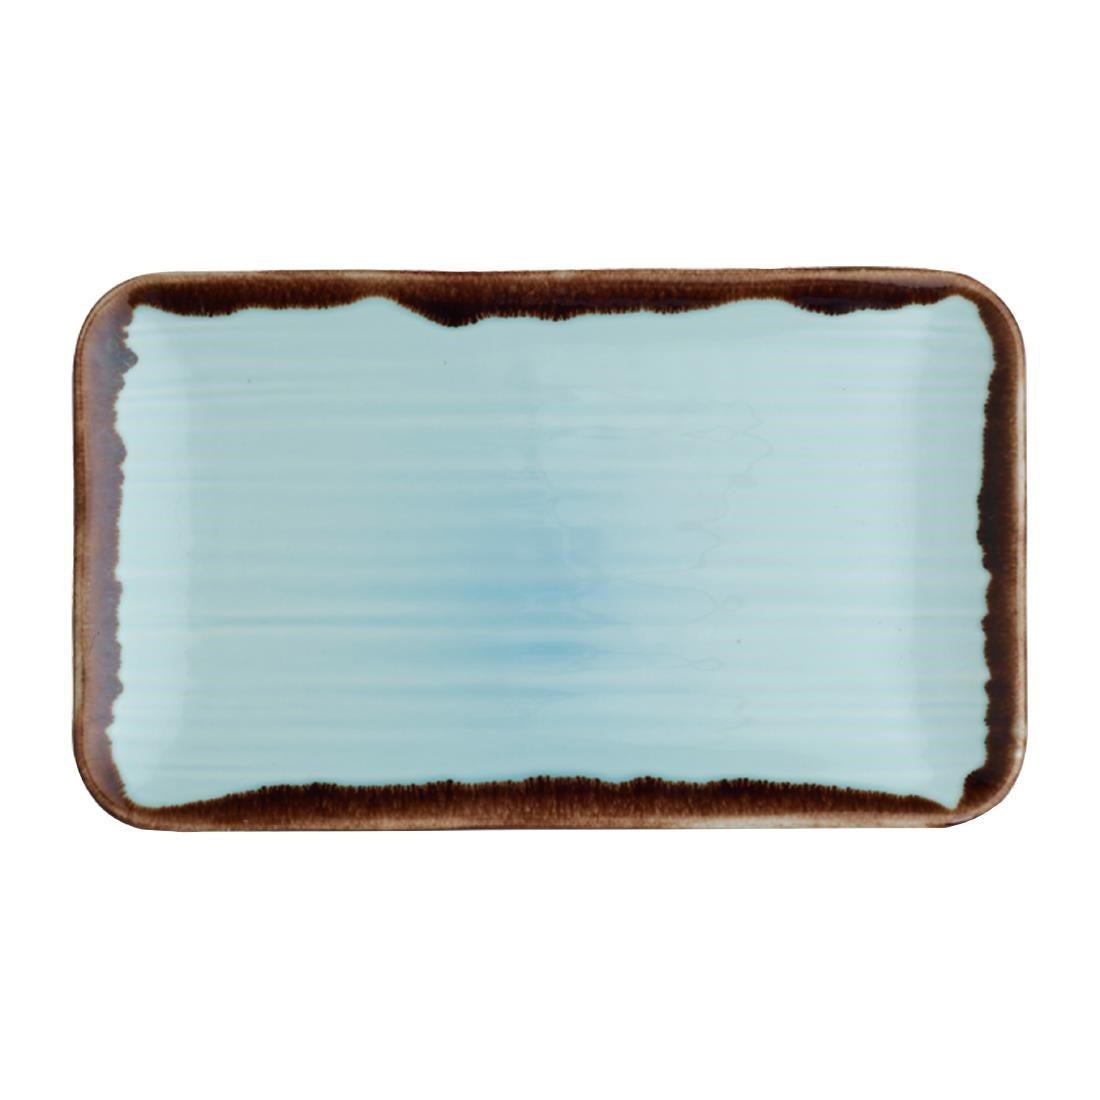 FX161 Dudson Harvest  Organic Rectangular Plates Turquoise 270mm (Pack of 12) JD Catering Equipment Solutions Ltd